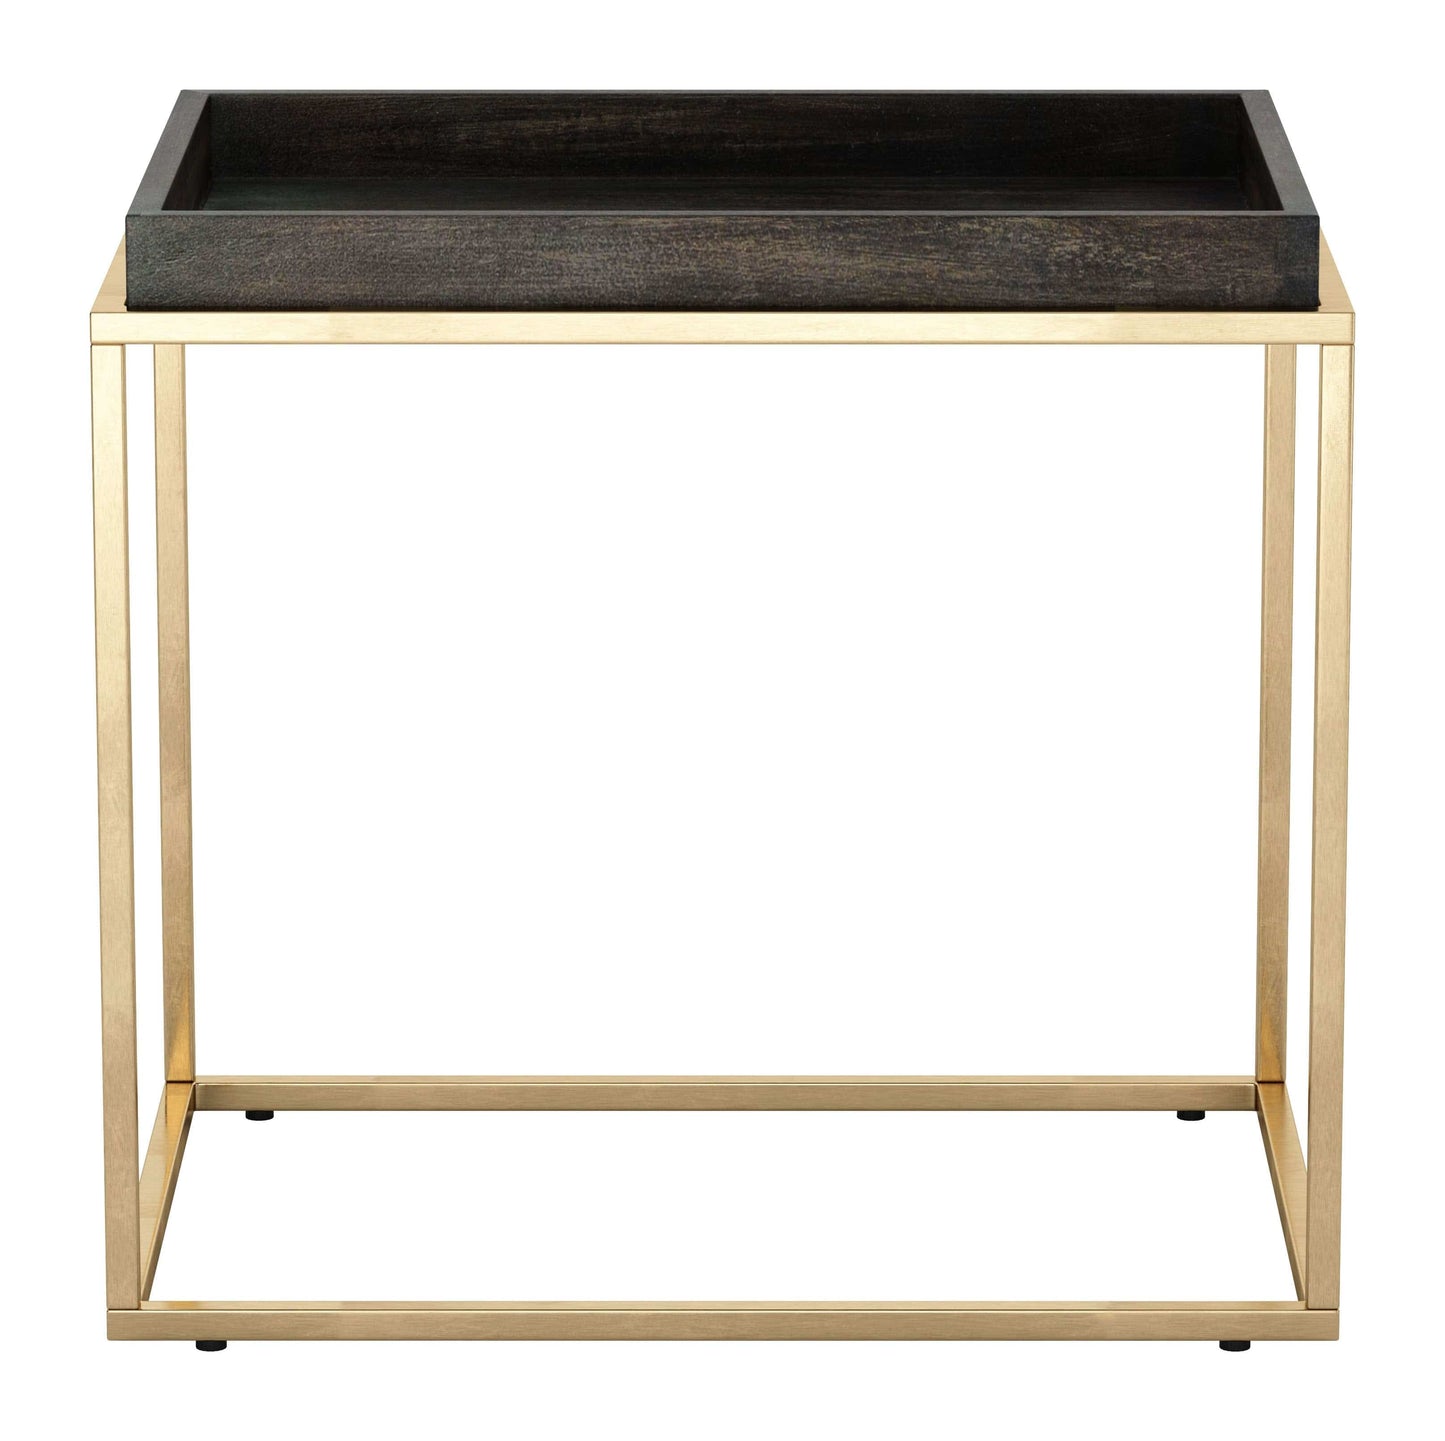 Front View of modern glam table